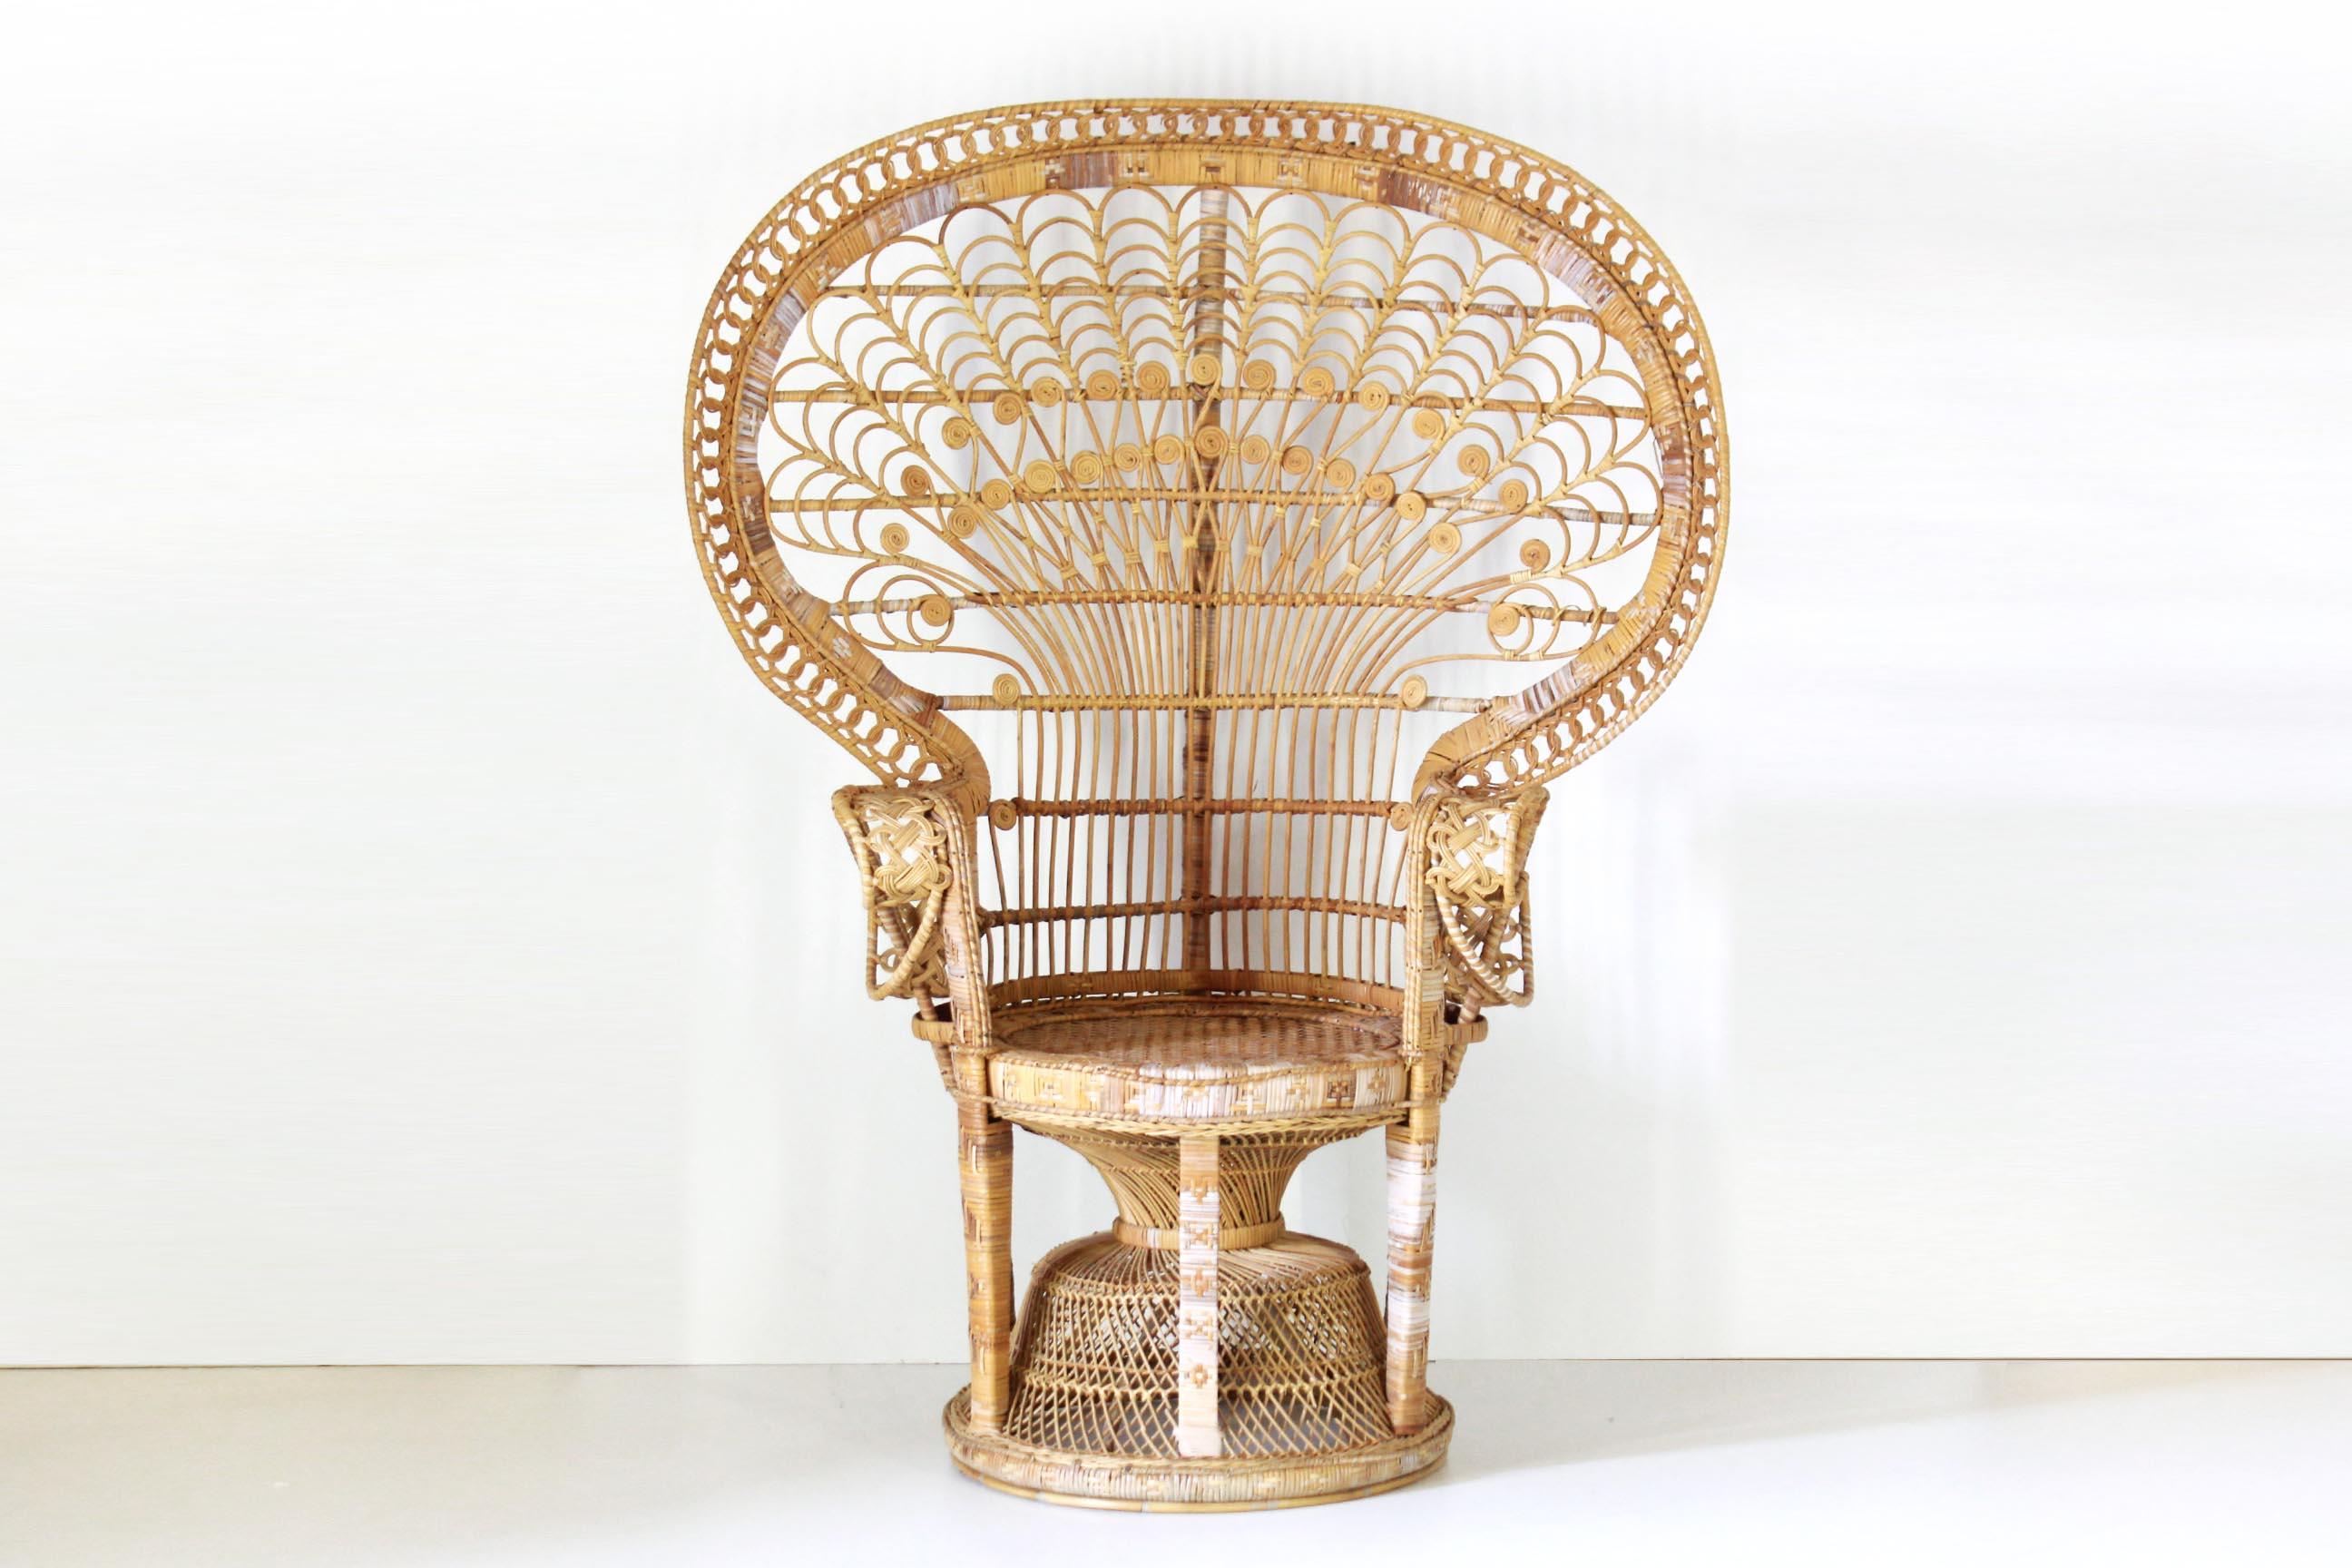 A rare 1970s vintage peacock wicker chair. Very detailed and refined pattern. In really good conditions with only few signs of time.